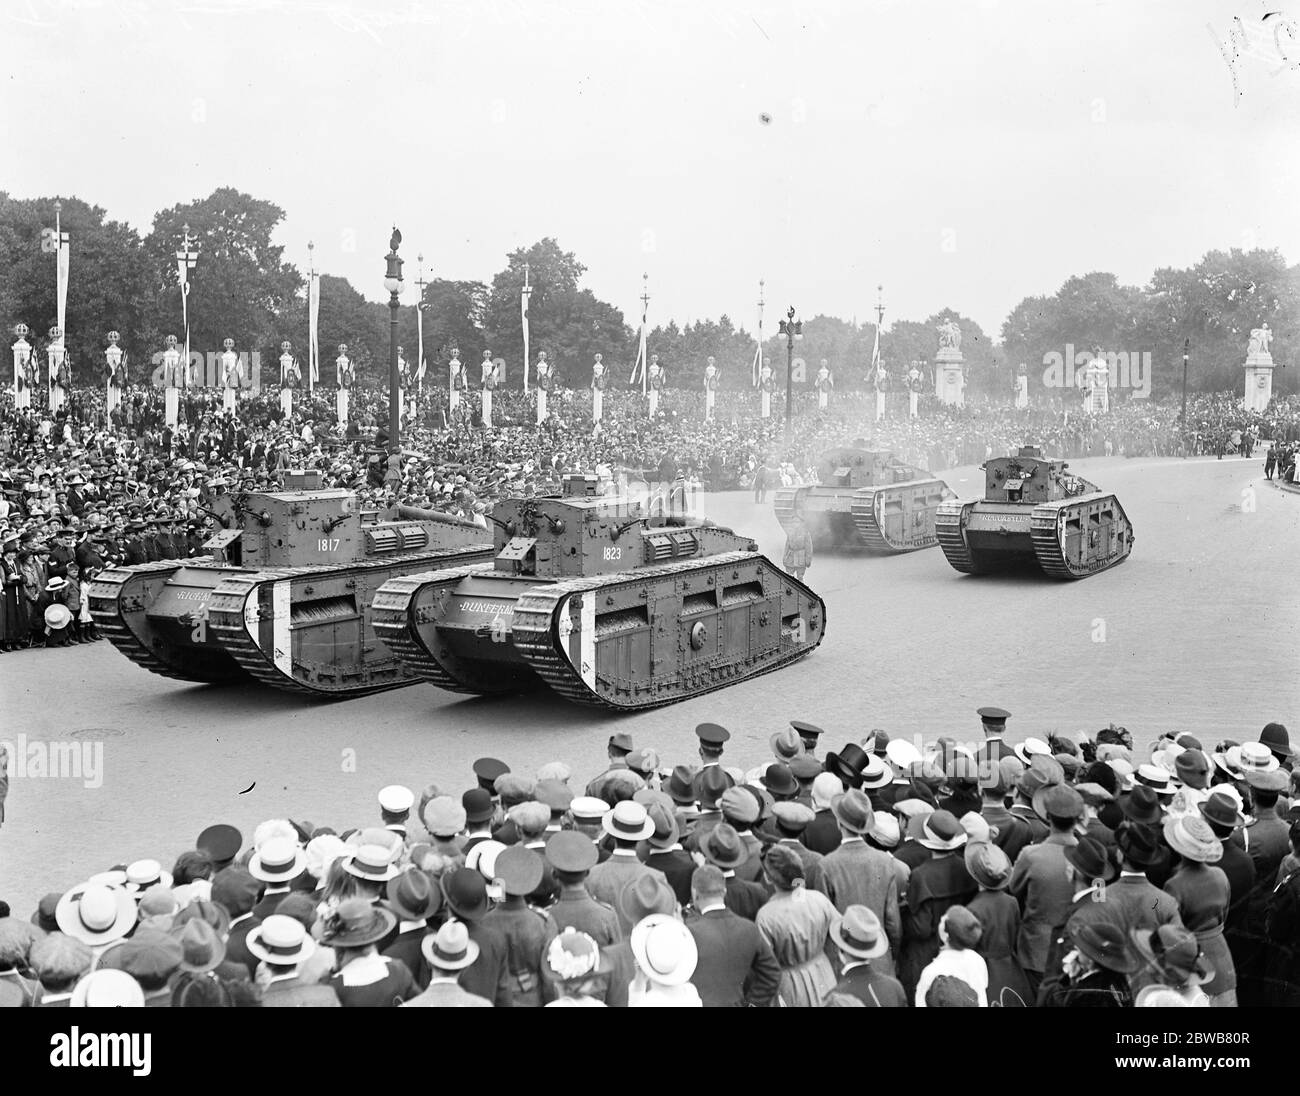 The great victory march in London . British tanks on parade . 19 July 1919 Stock Photo